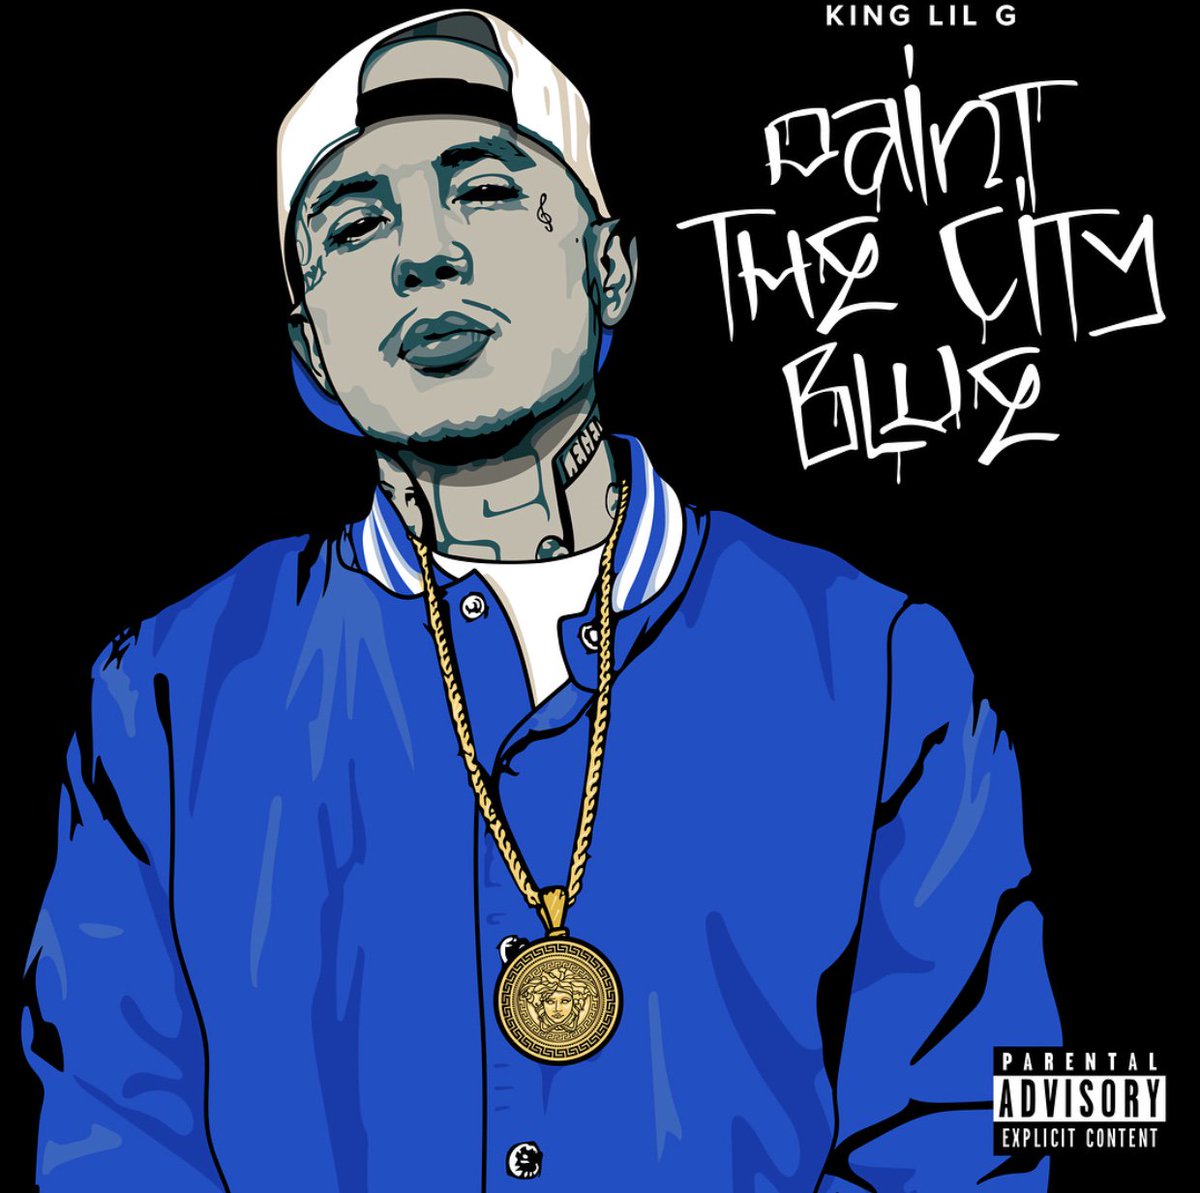 I’ve been listening to @kinglilg the whole time🔥🔥. My favorite song from the album is all of them cuz they heat 🔥. #paintthecityBLUE 🔵